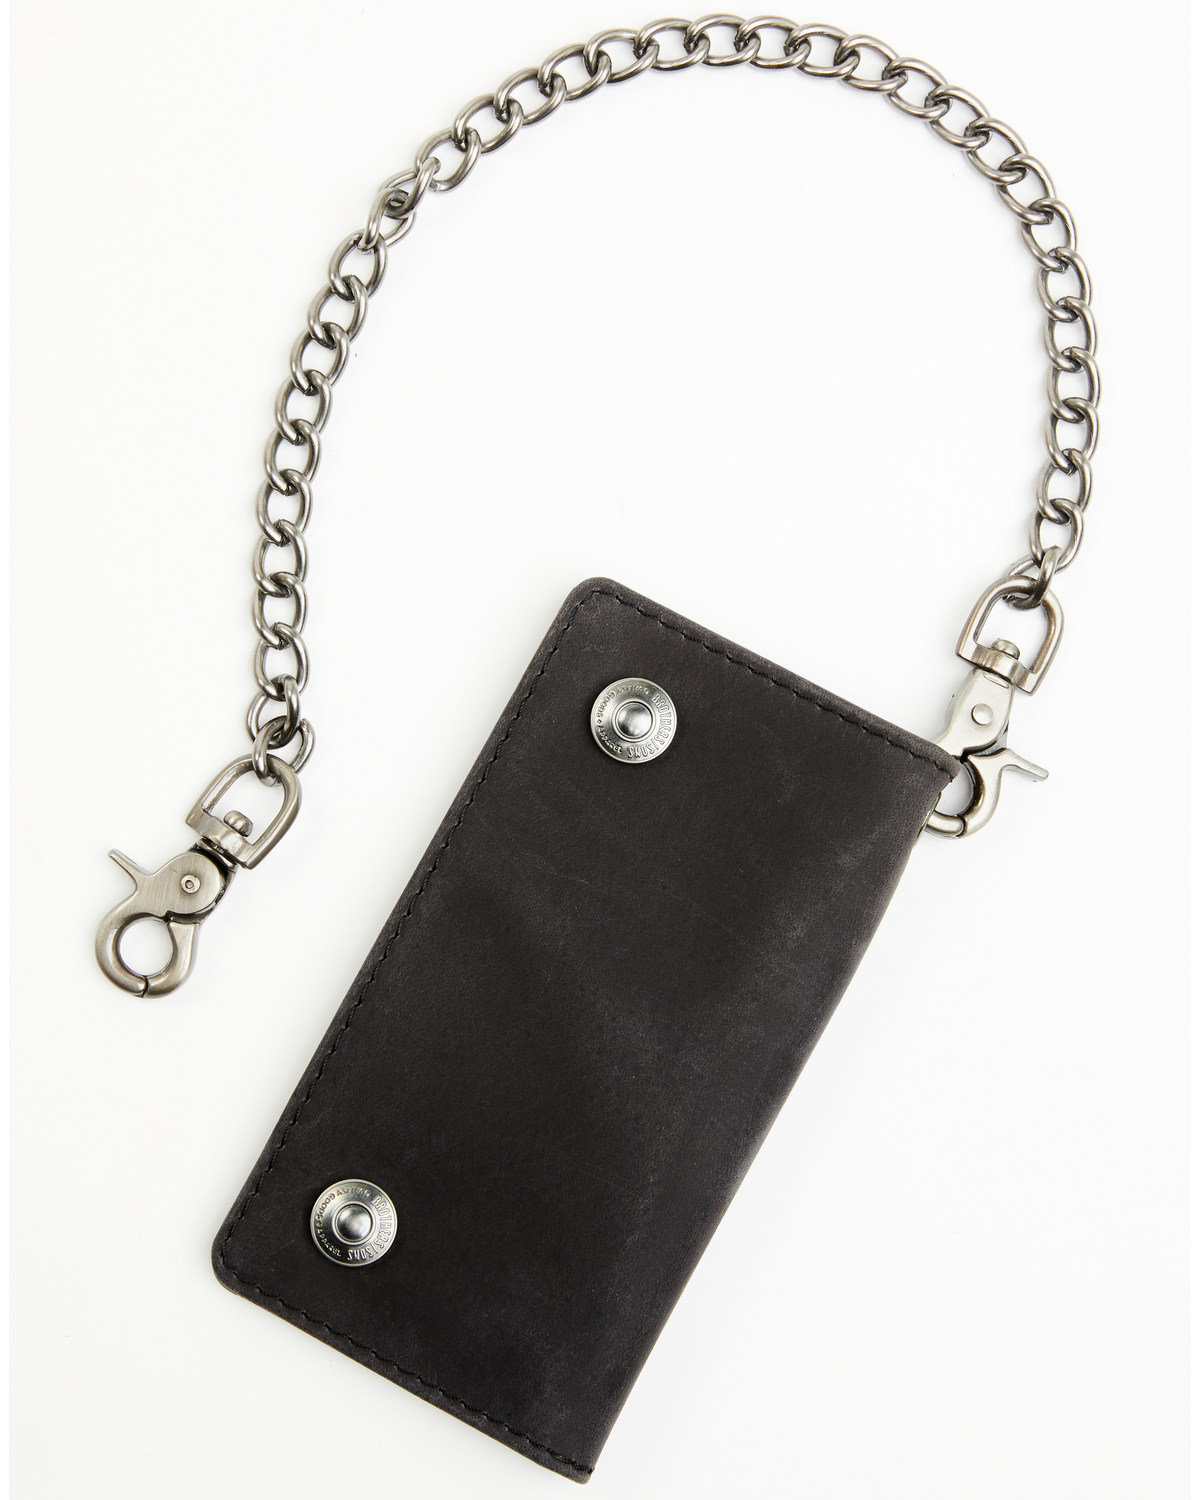 Brothers and Sons Men's Chain Wallet